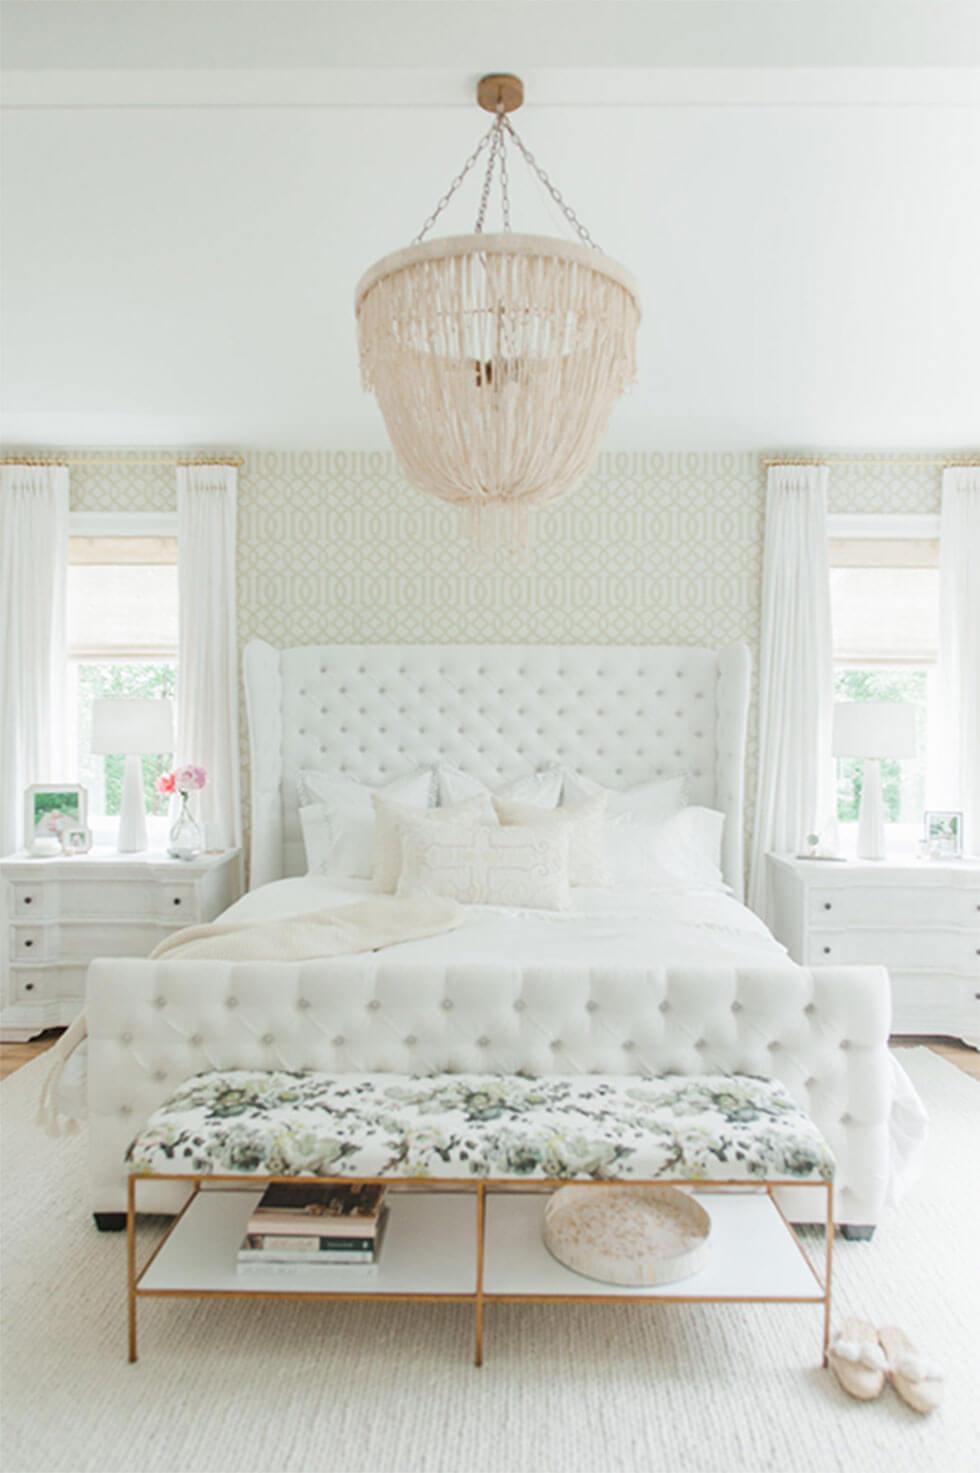 https://www.furniturechoice.co.uk/v5/img/hier/advice-and-inspiration/8-white-bedroom-ideas-that-will-never-go-out-of-style/01-all-white-bedroom-with-tufted-headboard-and-beaded-chandelier.jpg